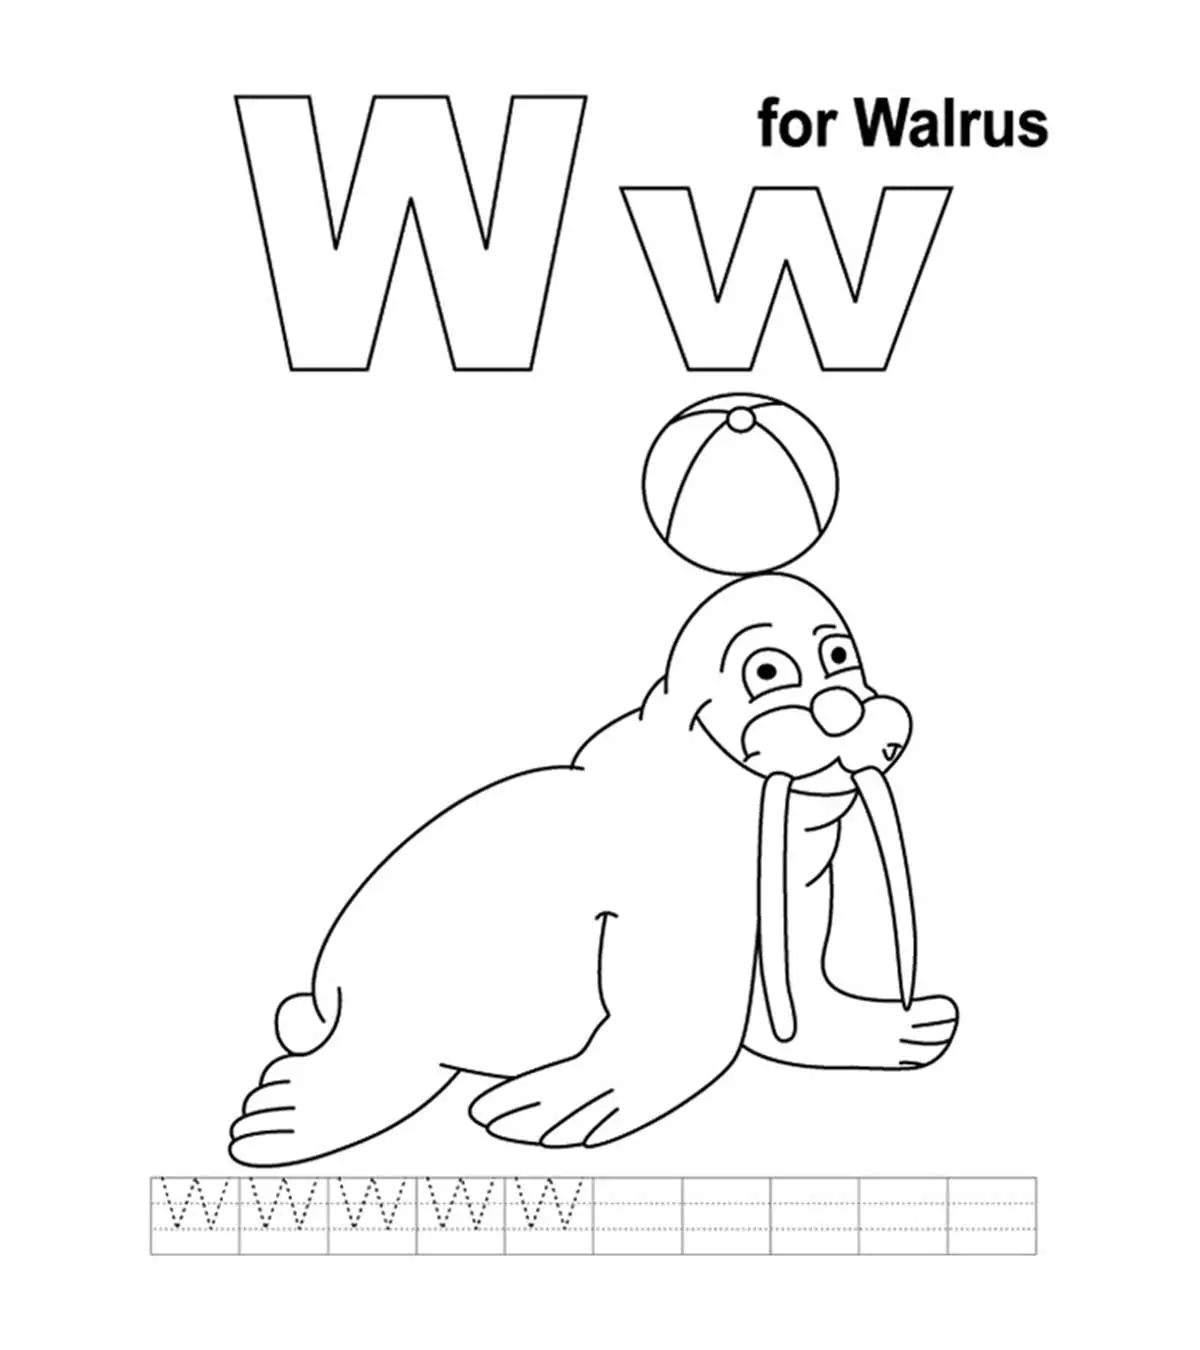 Top 10 Letter ‘W' Coloring Pages Your Toddler Will Love To Learn & Color